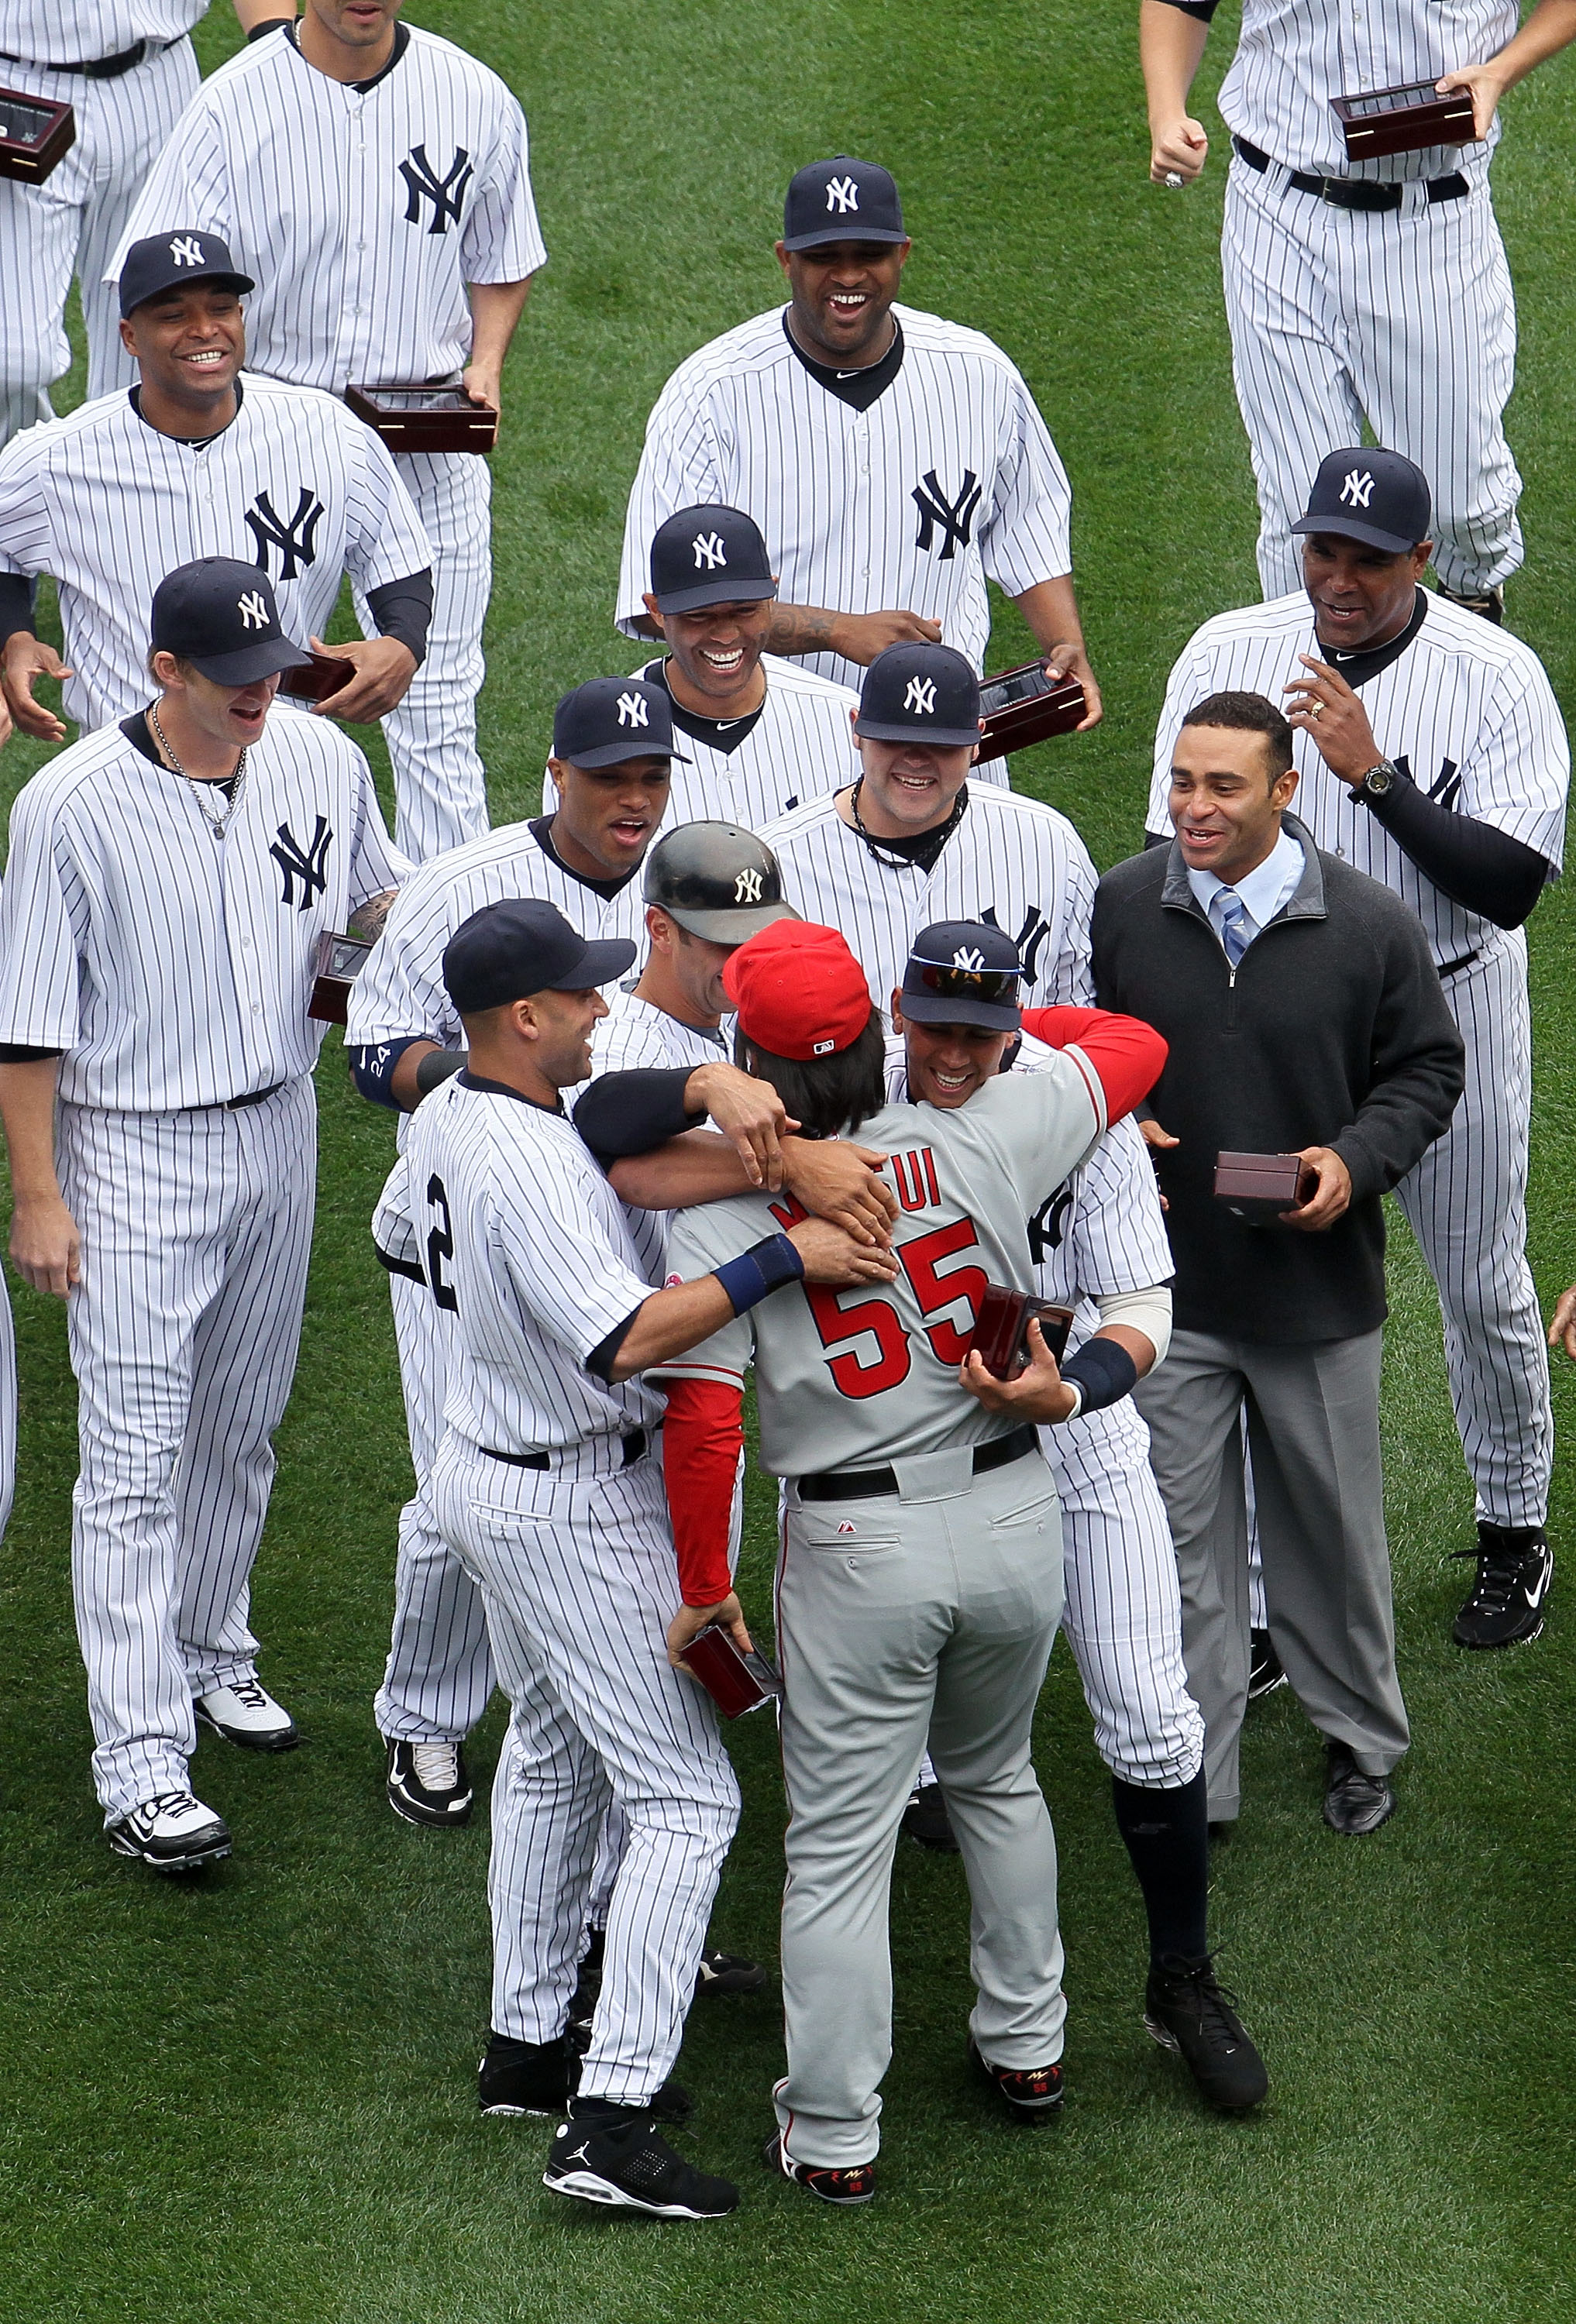 NEW YORK - APRIL 13:  Hideki Matsui #55 of the Los Angeles Angels of Anaheim is greeted by former teammates Alex Rodriguez #13, Derek Jeter #2, Jorge Posada #20, Robinson Cano #24, Joba Chamberlain #62 and Mariano Rivera #42 of the New York Yankees after